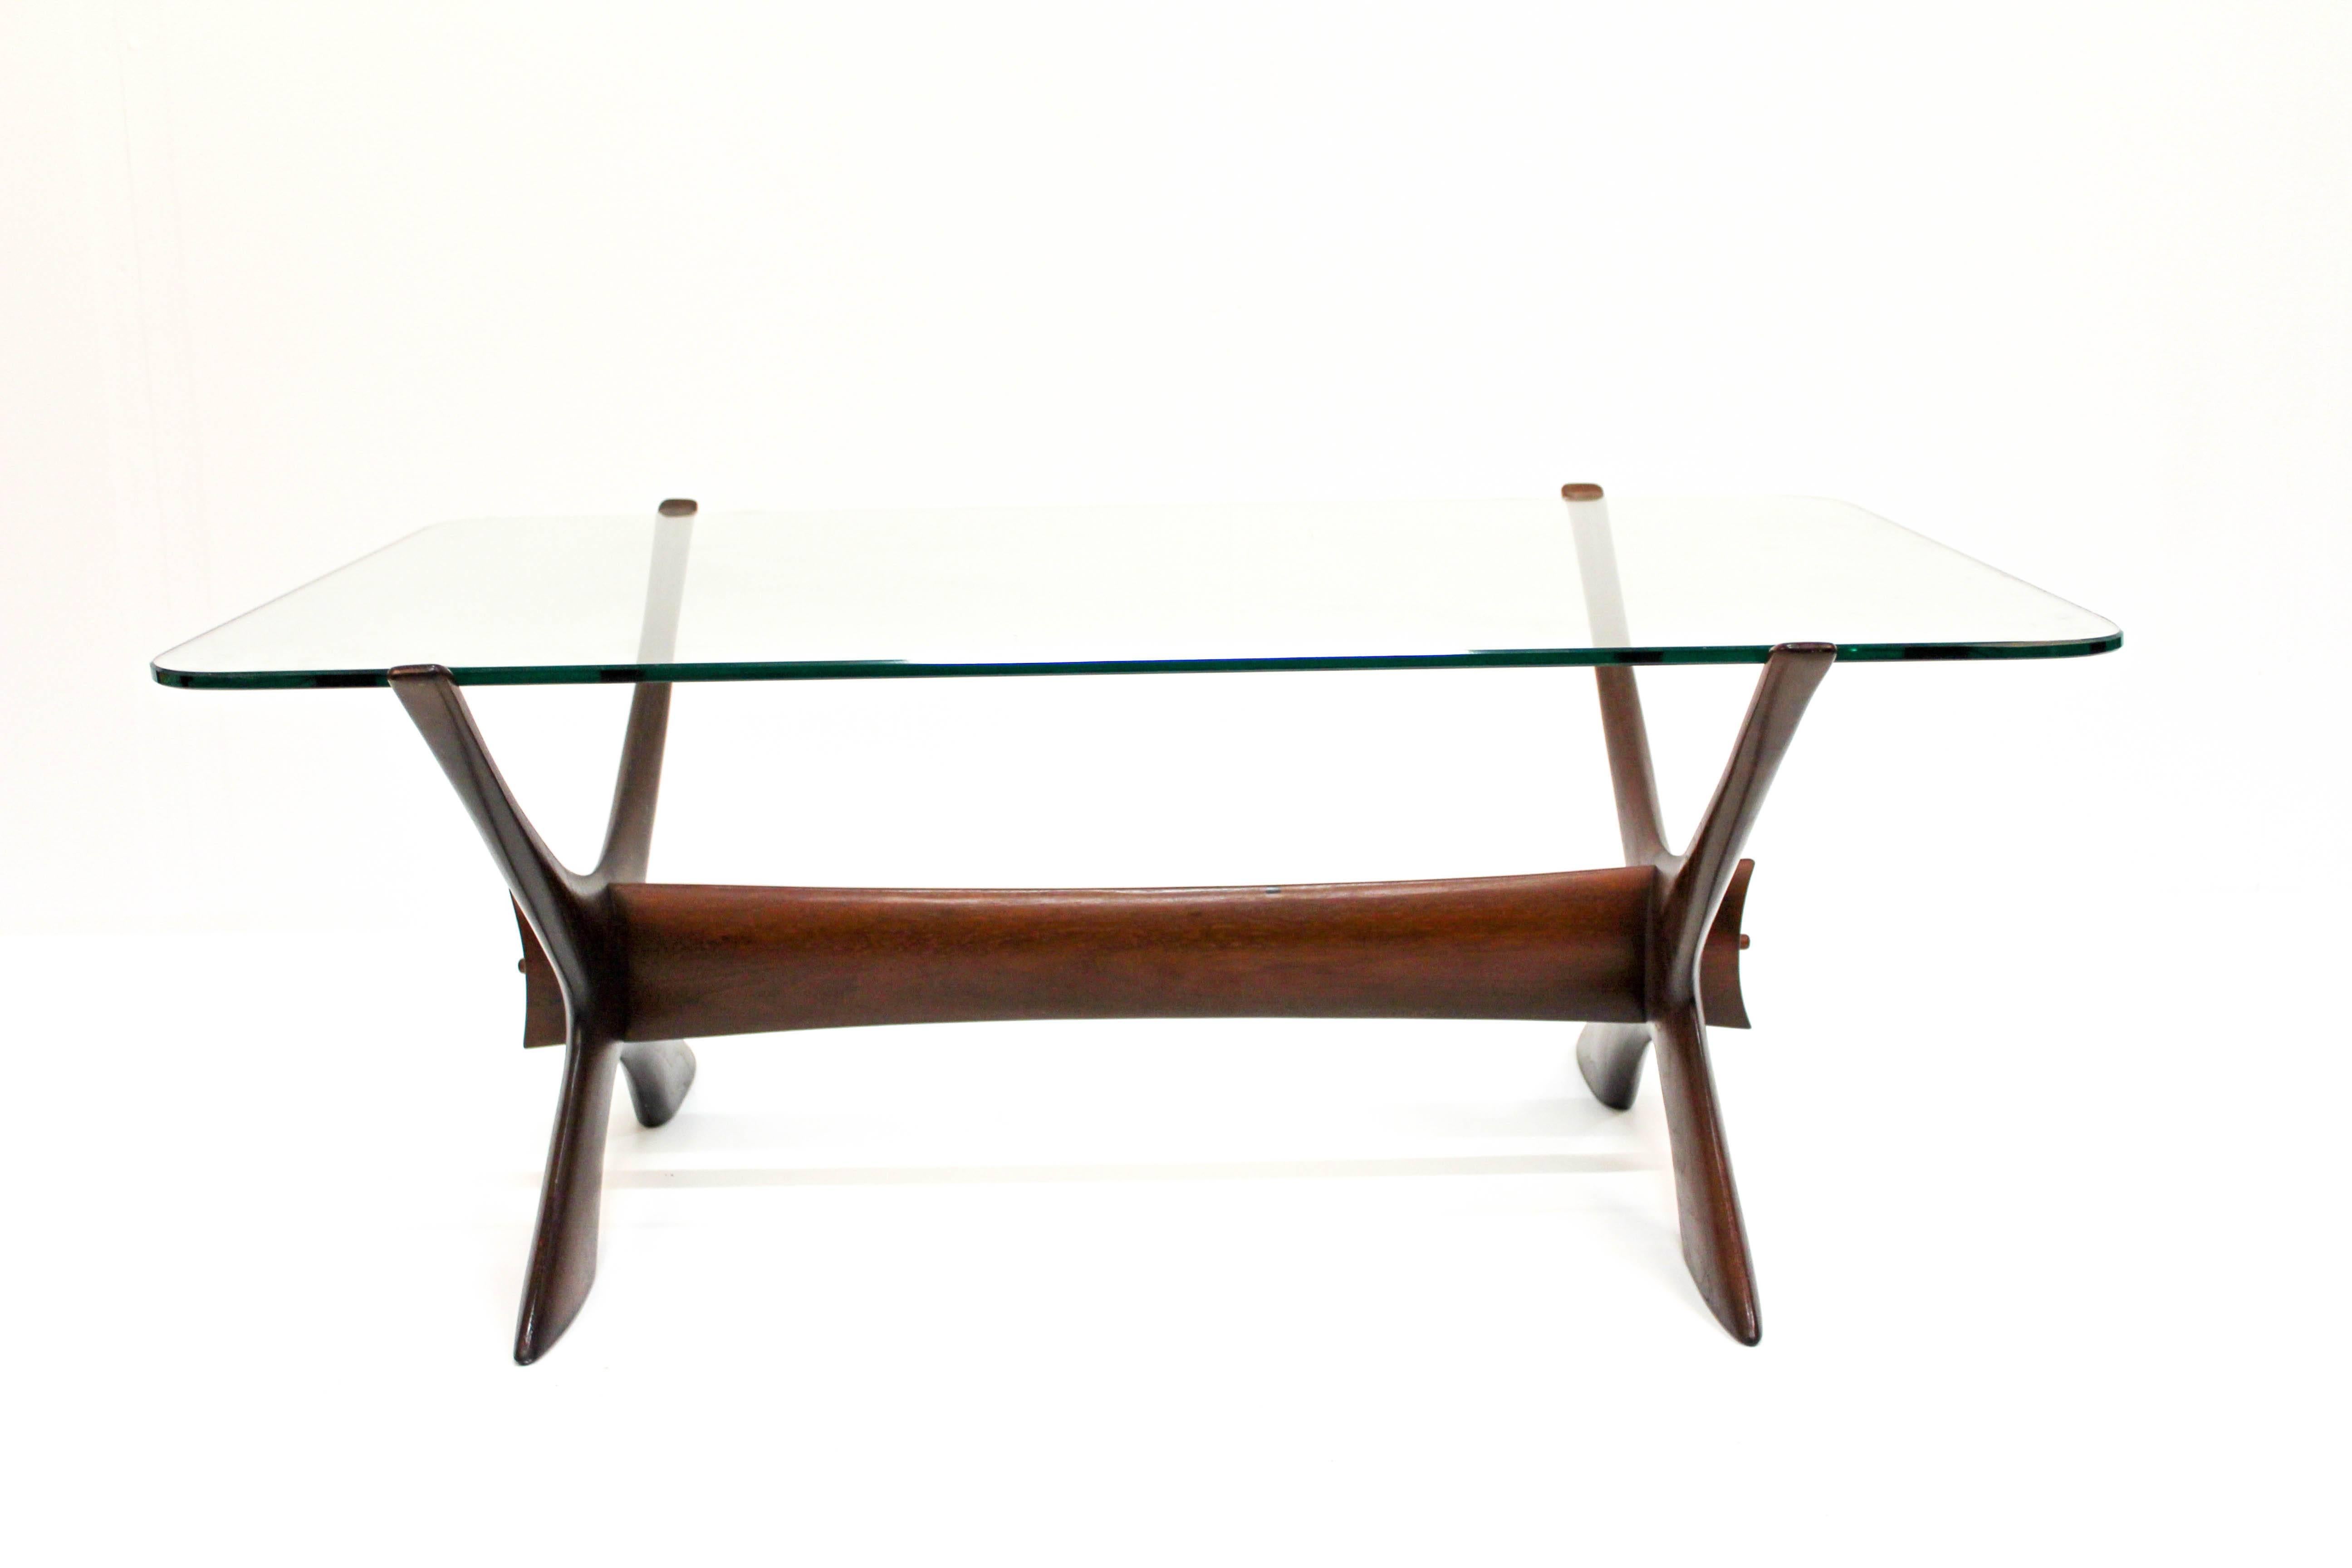 Midcentury Swedish coffee table designed by Fredrik Schriever-Abeln. The table has a beautifully sculptured teak frame and a tabletop made out of glass with rounded edges. The table is in good vintage condition with signs of usage, especially where